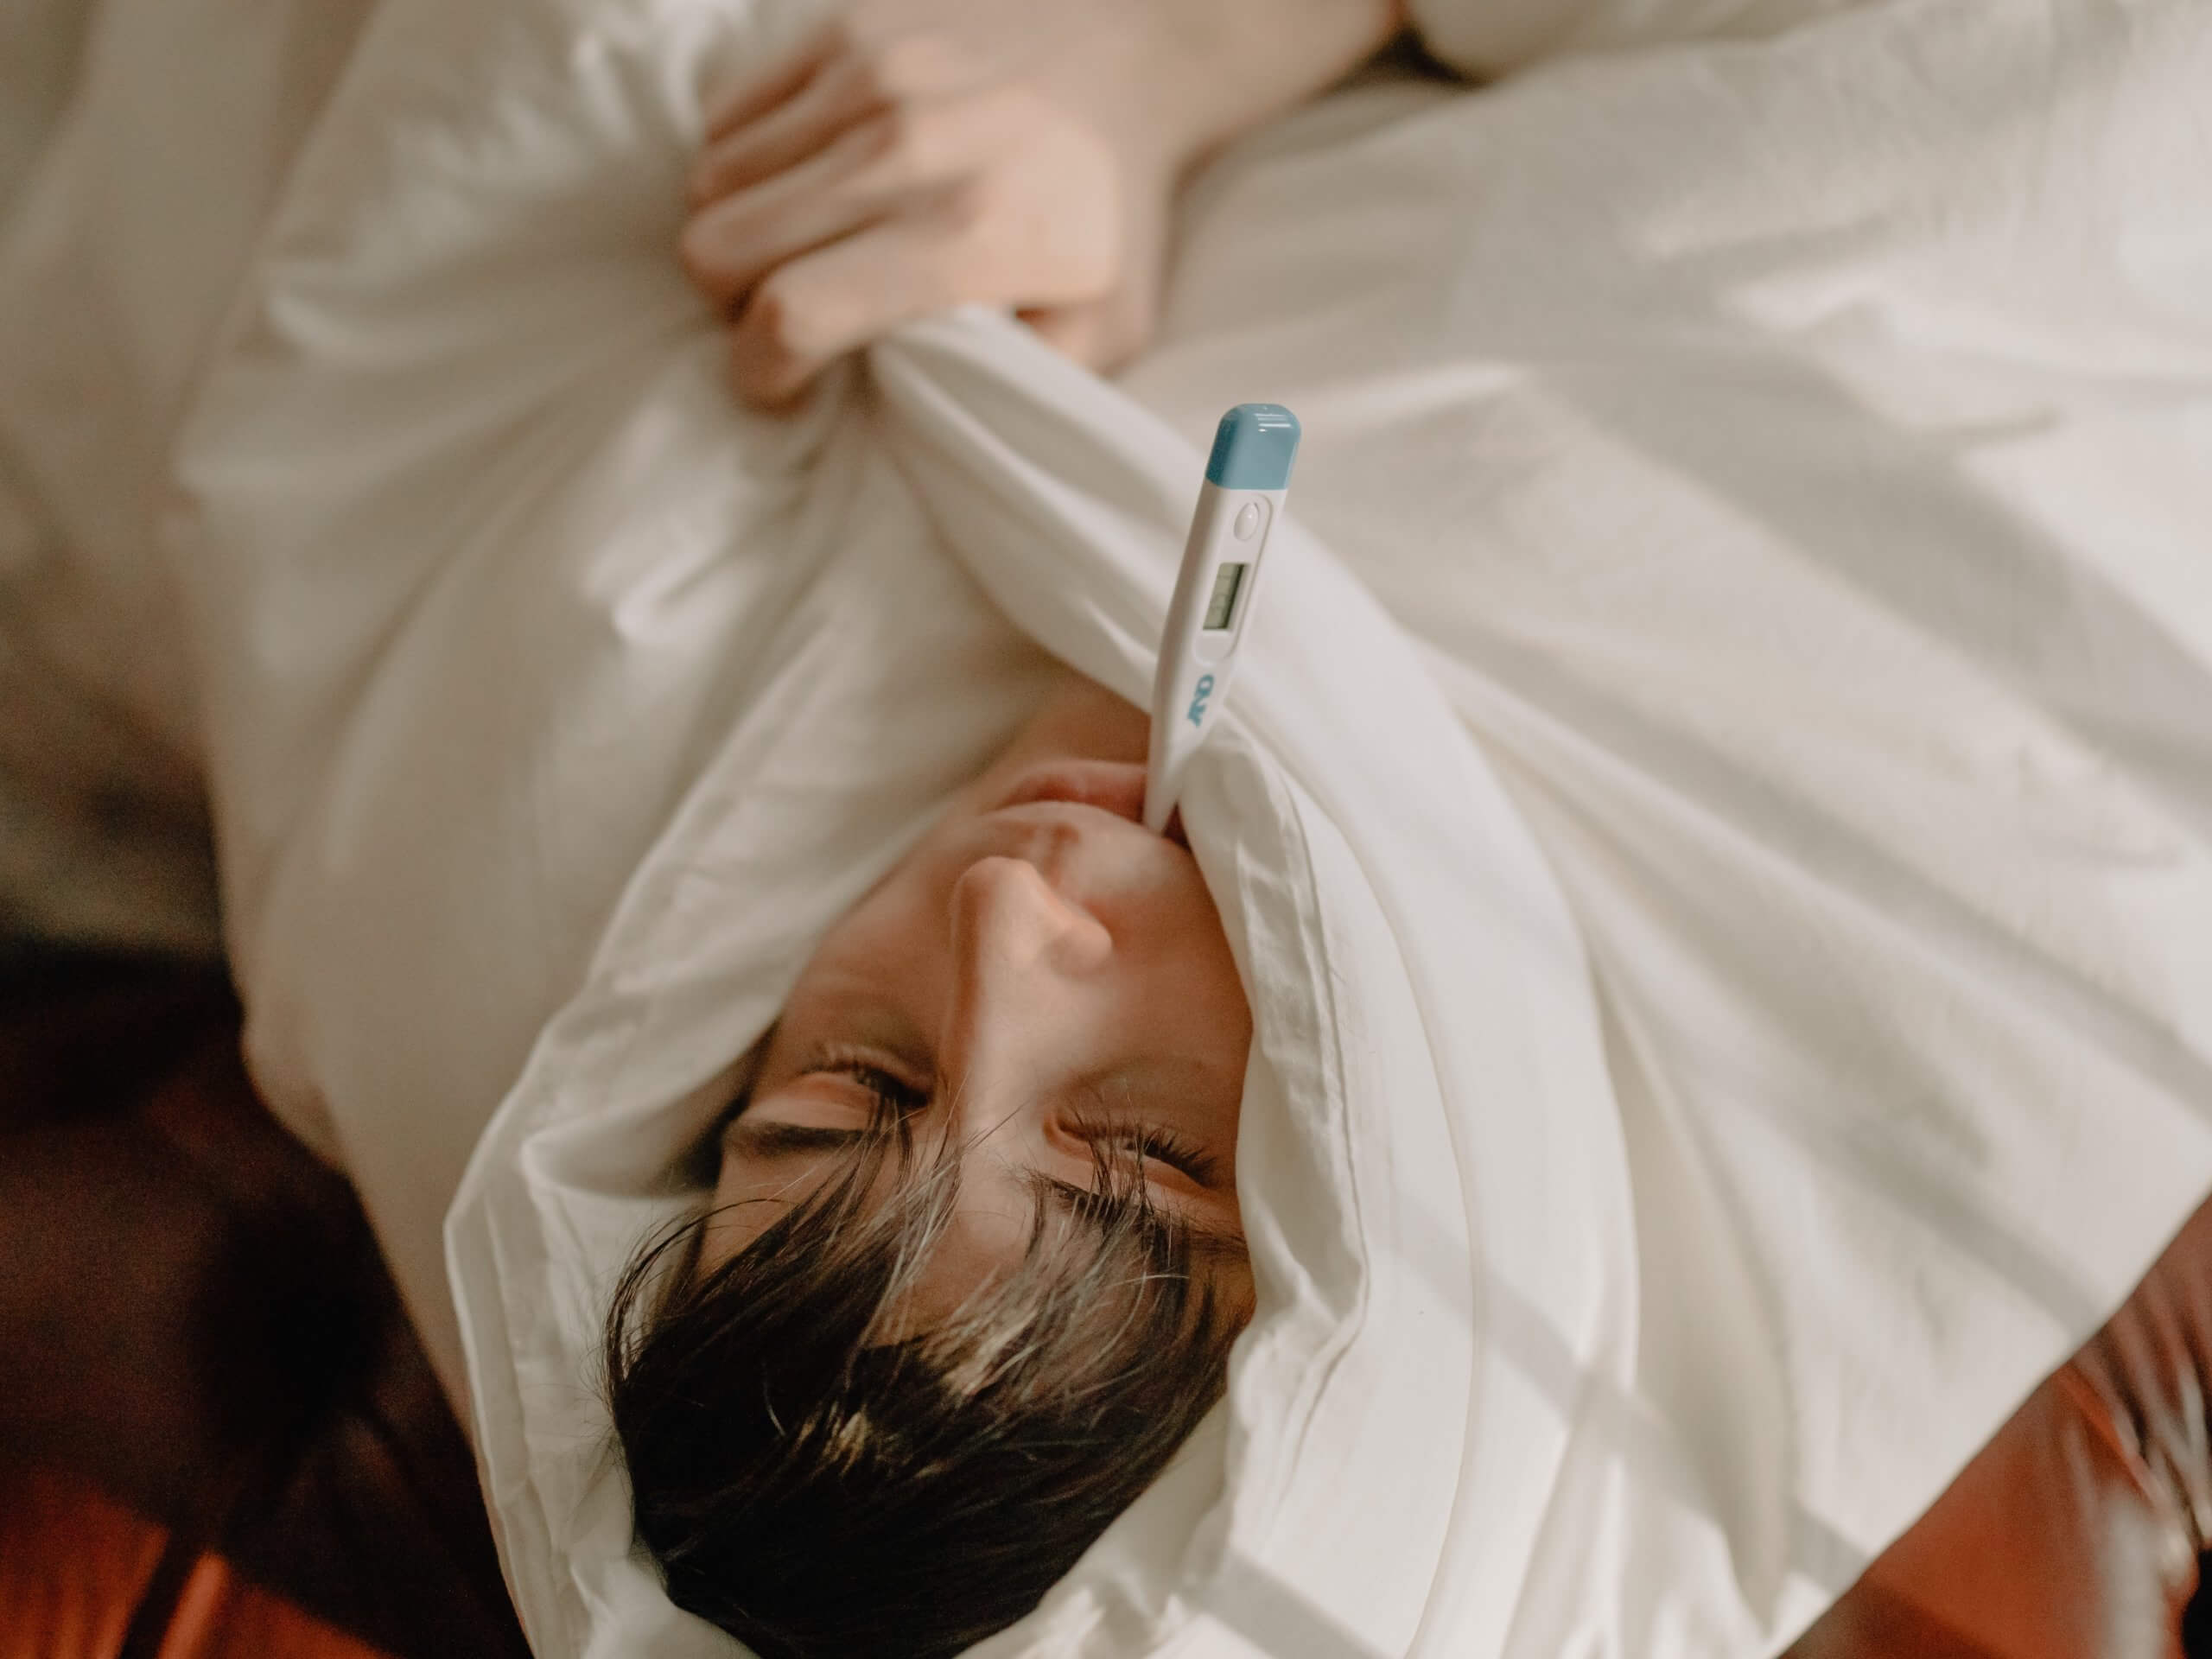 Man sick in bed with thermometer in mouth